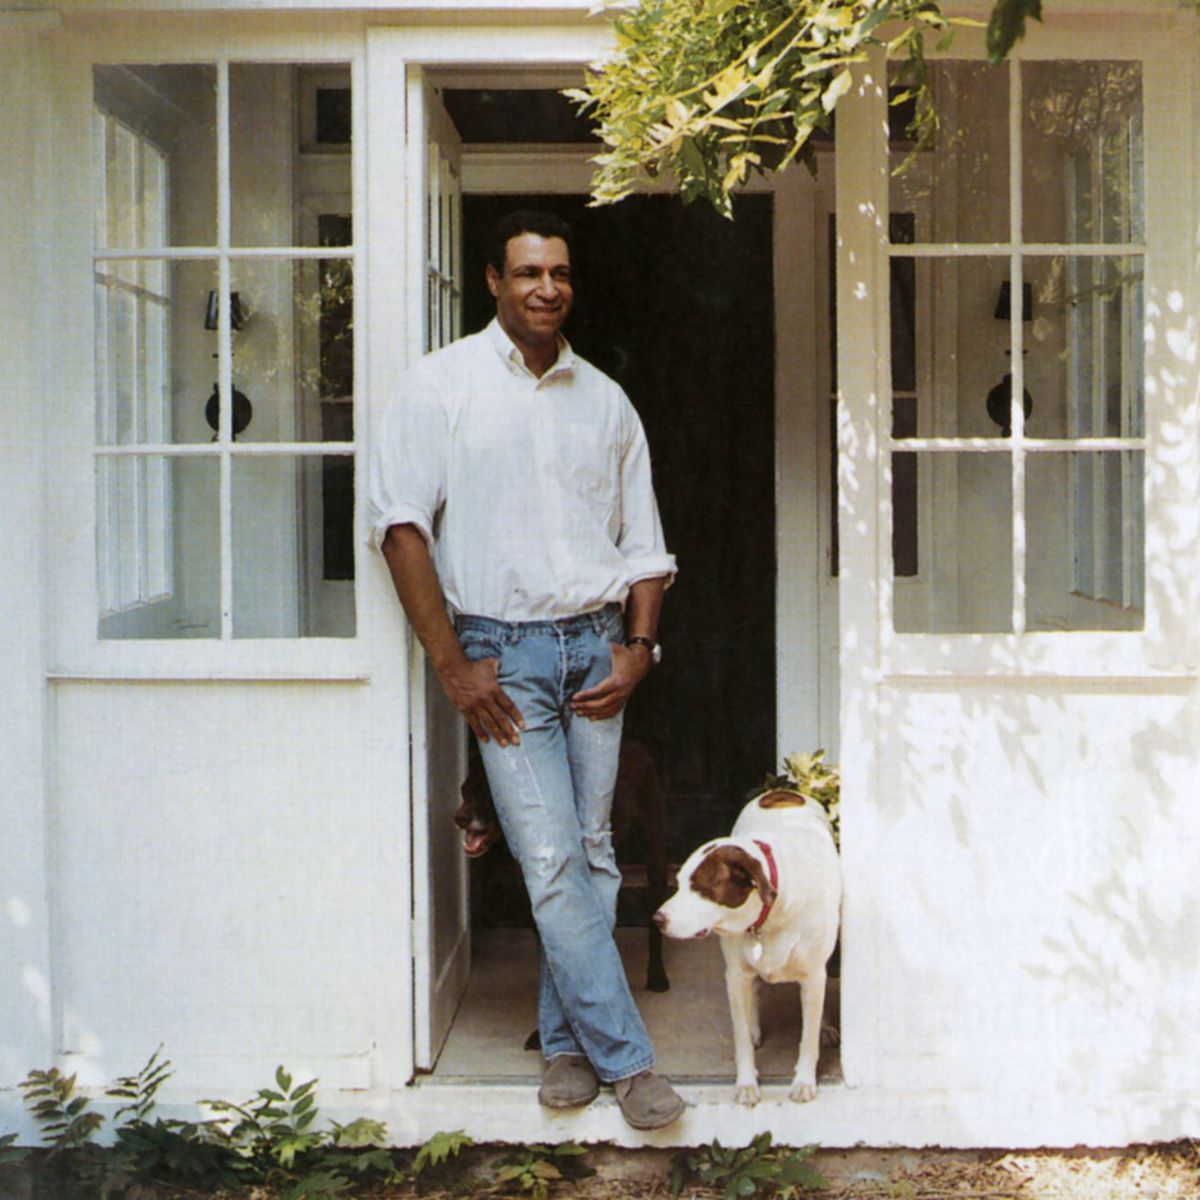 interior designer darryl carter at his 19th century farmhouse in virginia with his dogs otis and lucy